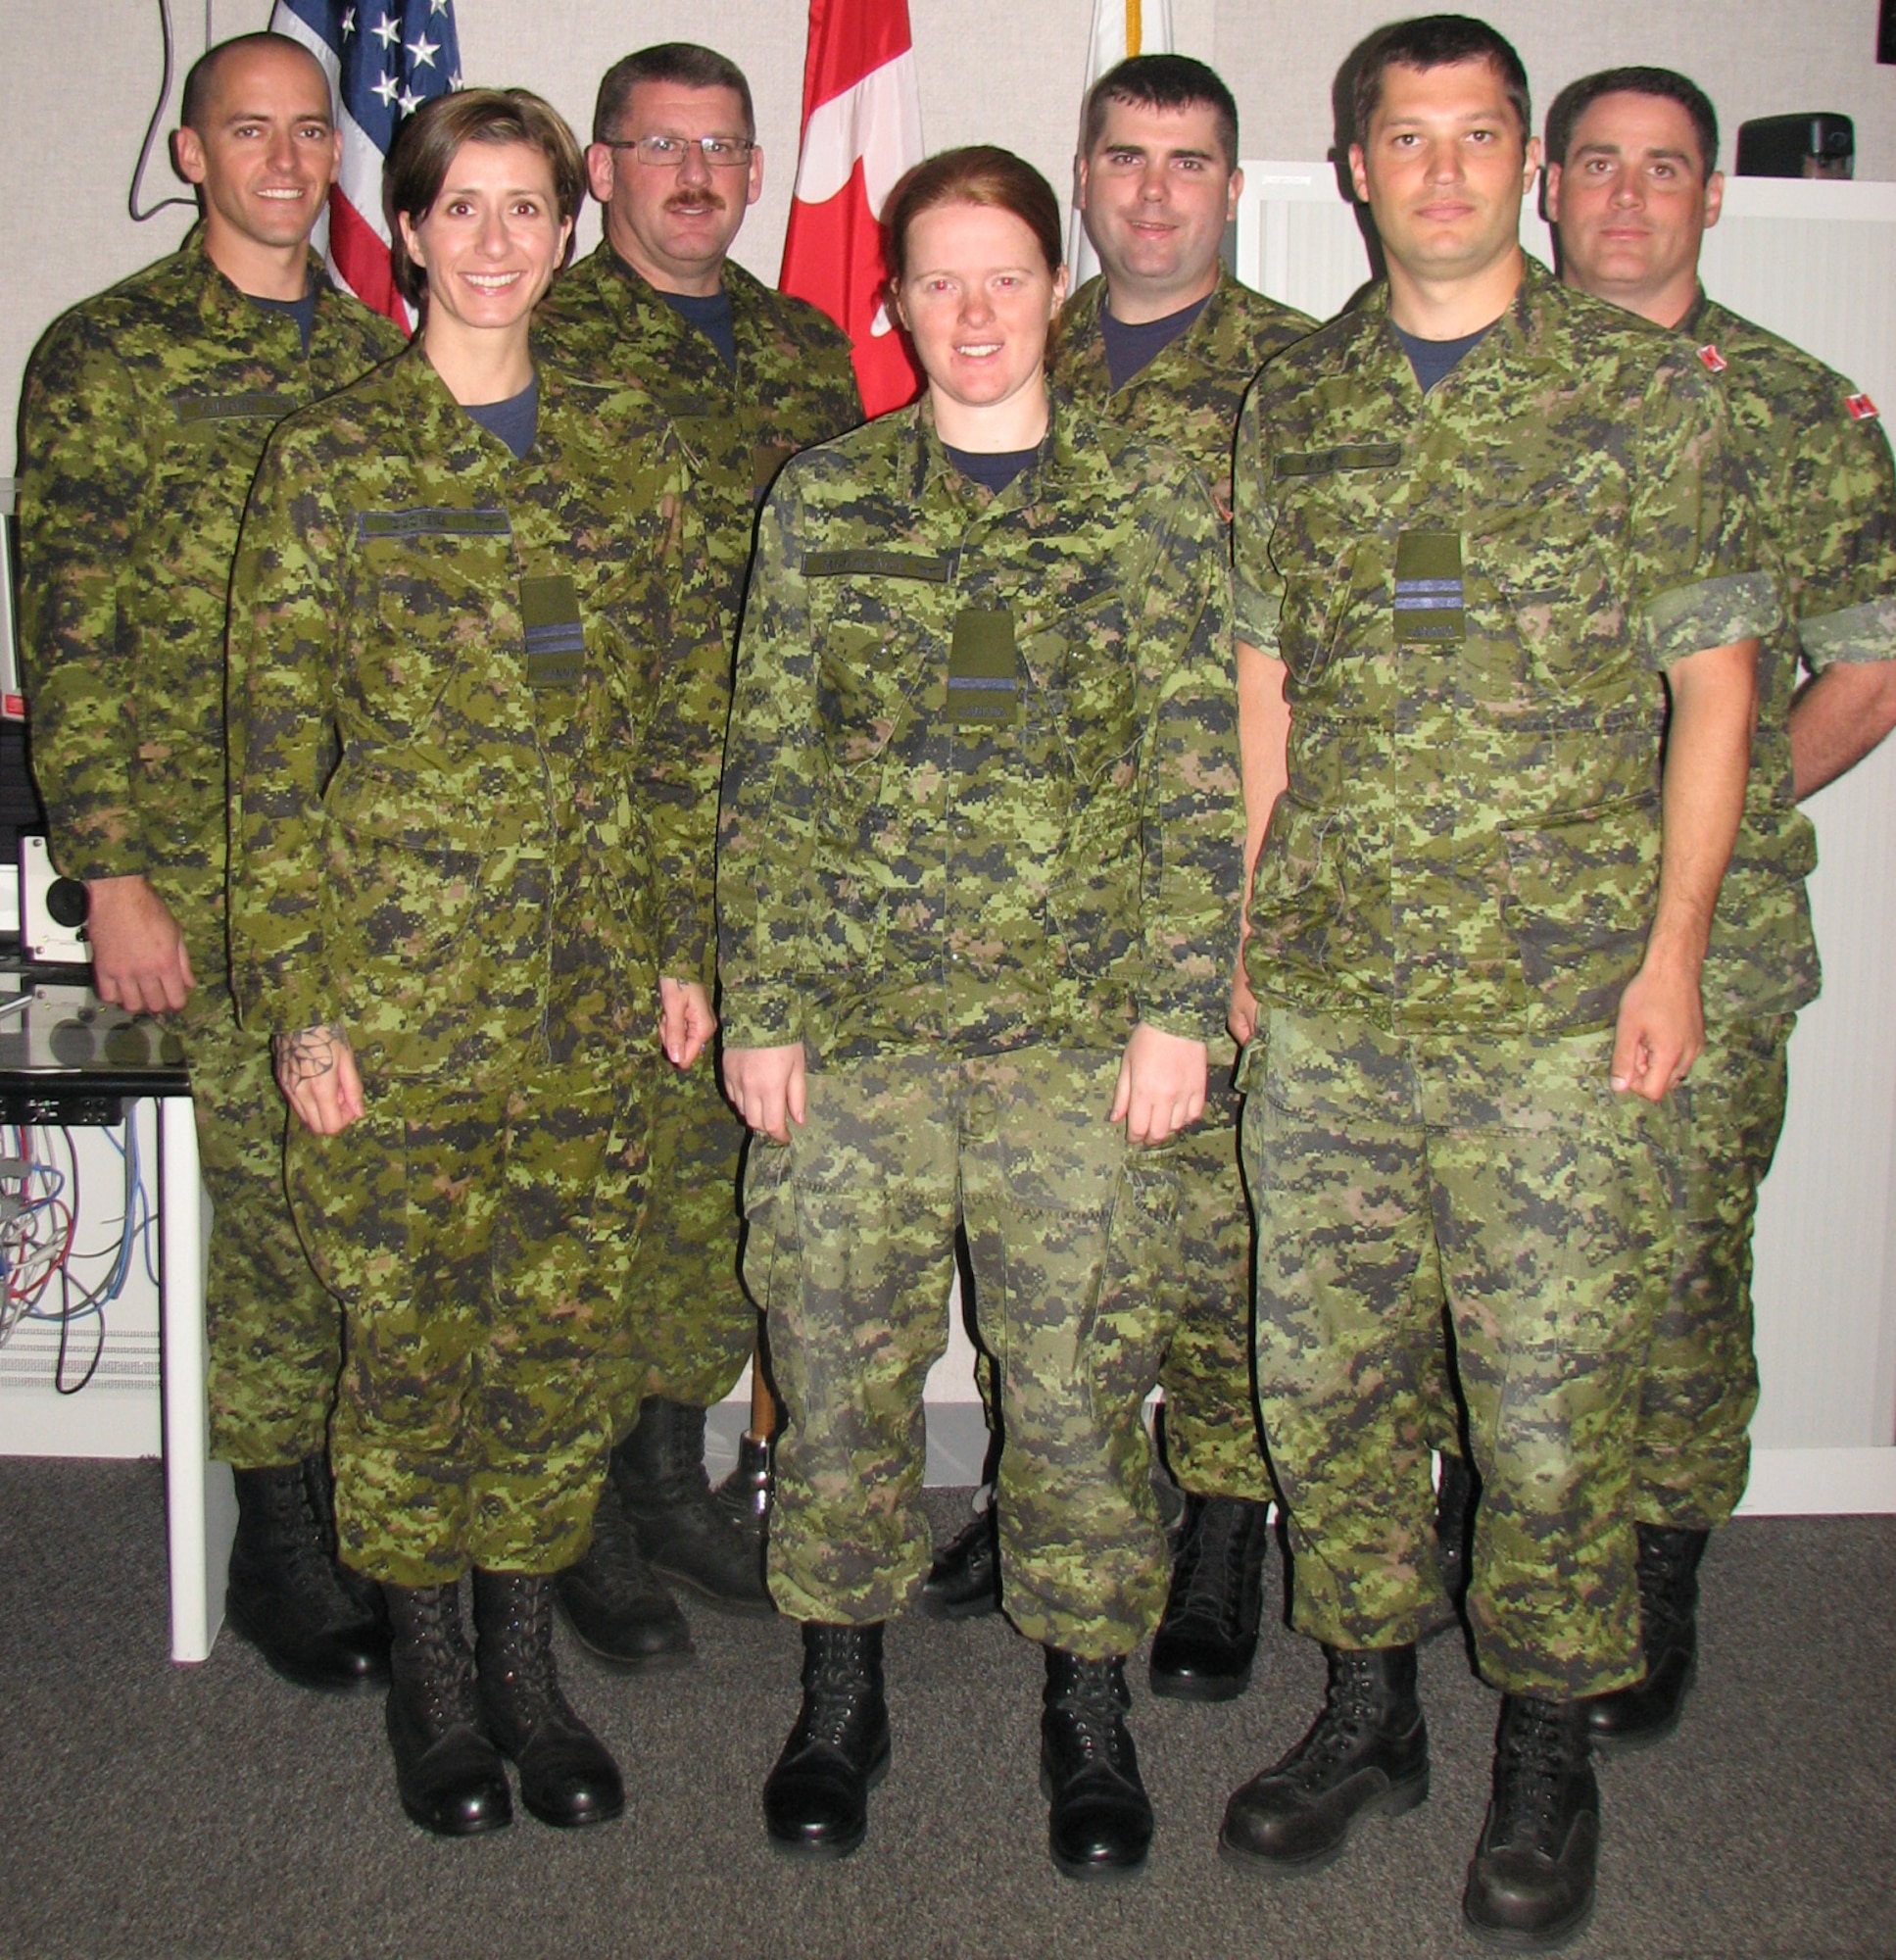 A group of Canadian student aerospace controllers and their instructors from the 51 Aerospace Control and Warning Operational Training Squadron in North Bay, Ont. just completed three weeks of training at the Eastern Air Defense Sector. Pictured in the front row are students:  Capt. Cynthia Duchene, 2nd Lt. Meghan McCready and. Capt. Michael Kallio. Back row, from left to right, are instructors Cpl. Terry Gibbins, Capt. Jim Mersereau, Capt. Michael Garrett and Capt. Joey Baker, the OIC for the training detachment.  